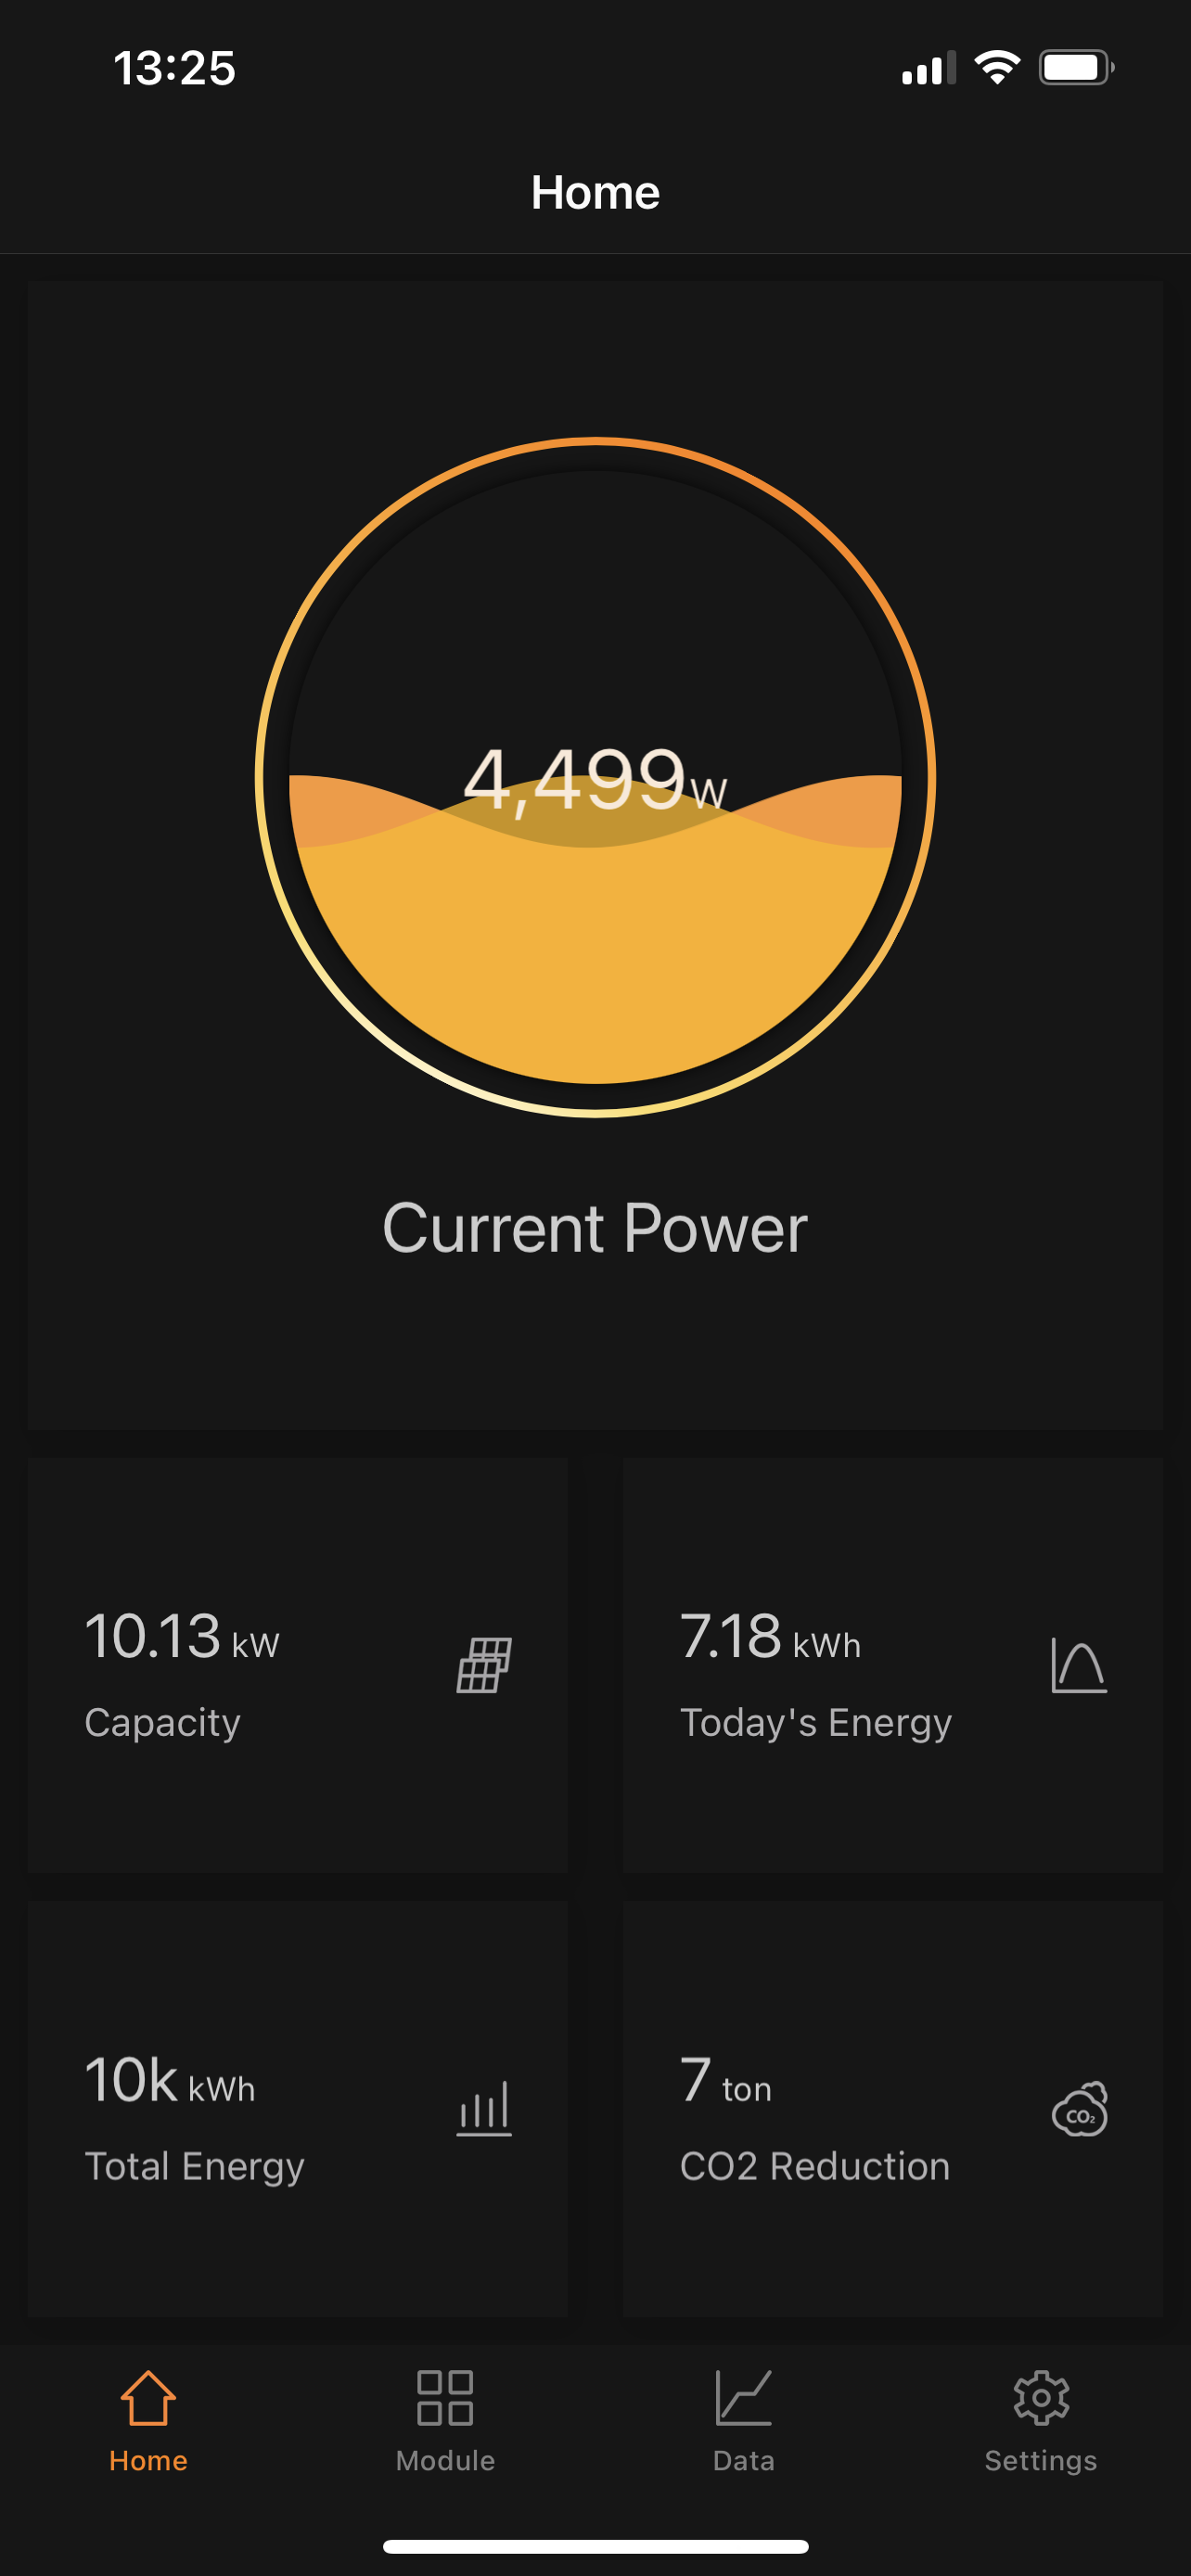 Screen shot of the EMA app showing 10k kWh (10 mWh) generated since activation.